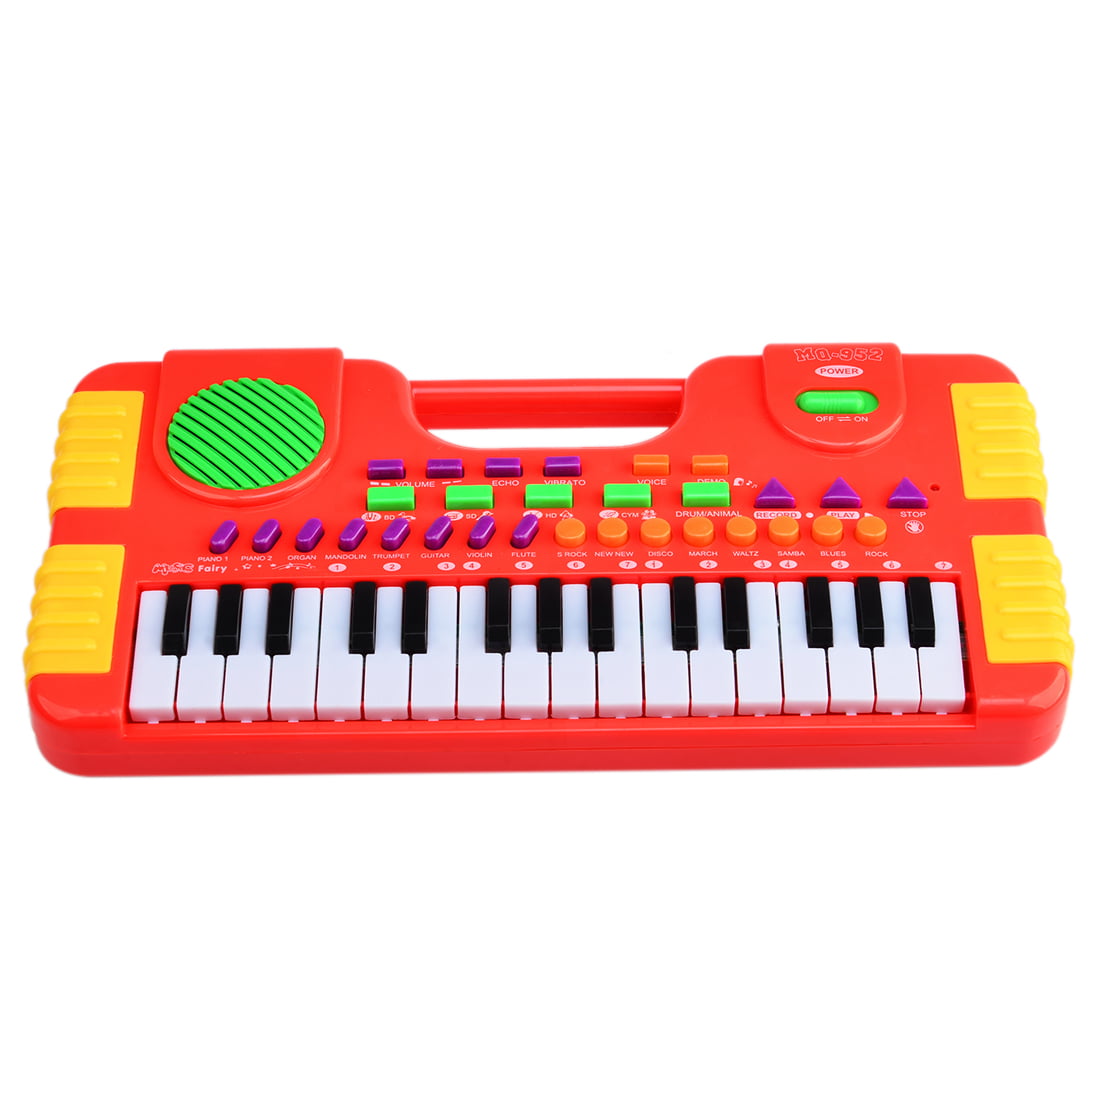 31-key educational music electronic children's toy grand piano with stool 